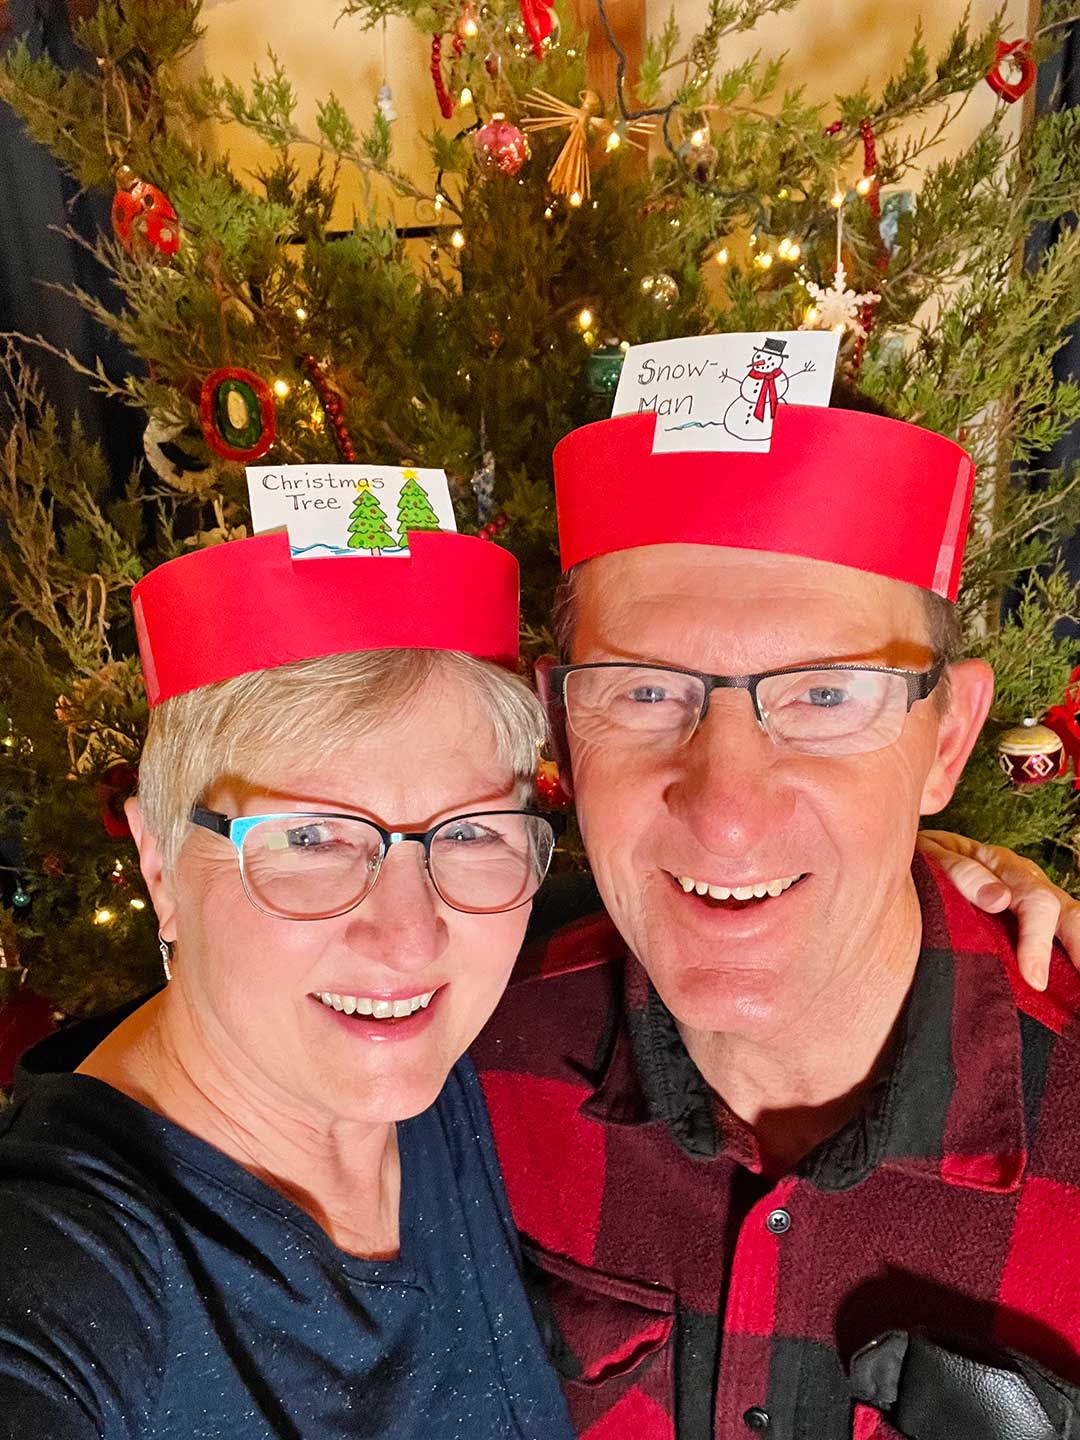 Nana and Papa with DIY headband game on heads in front of a decorated Christmas tree.